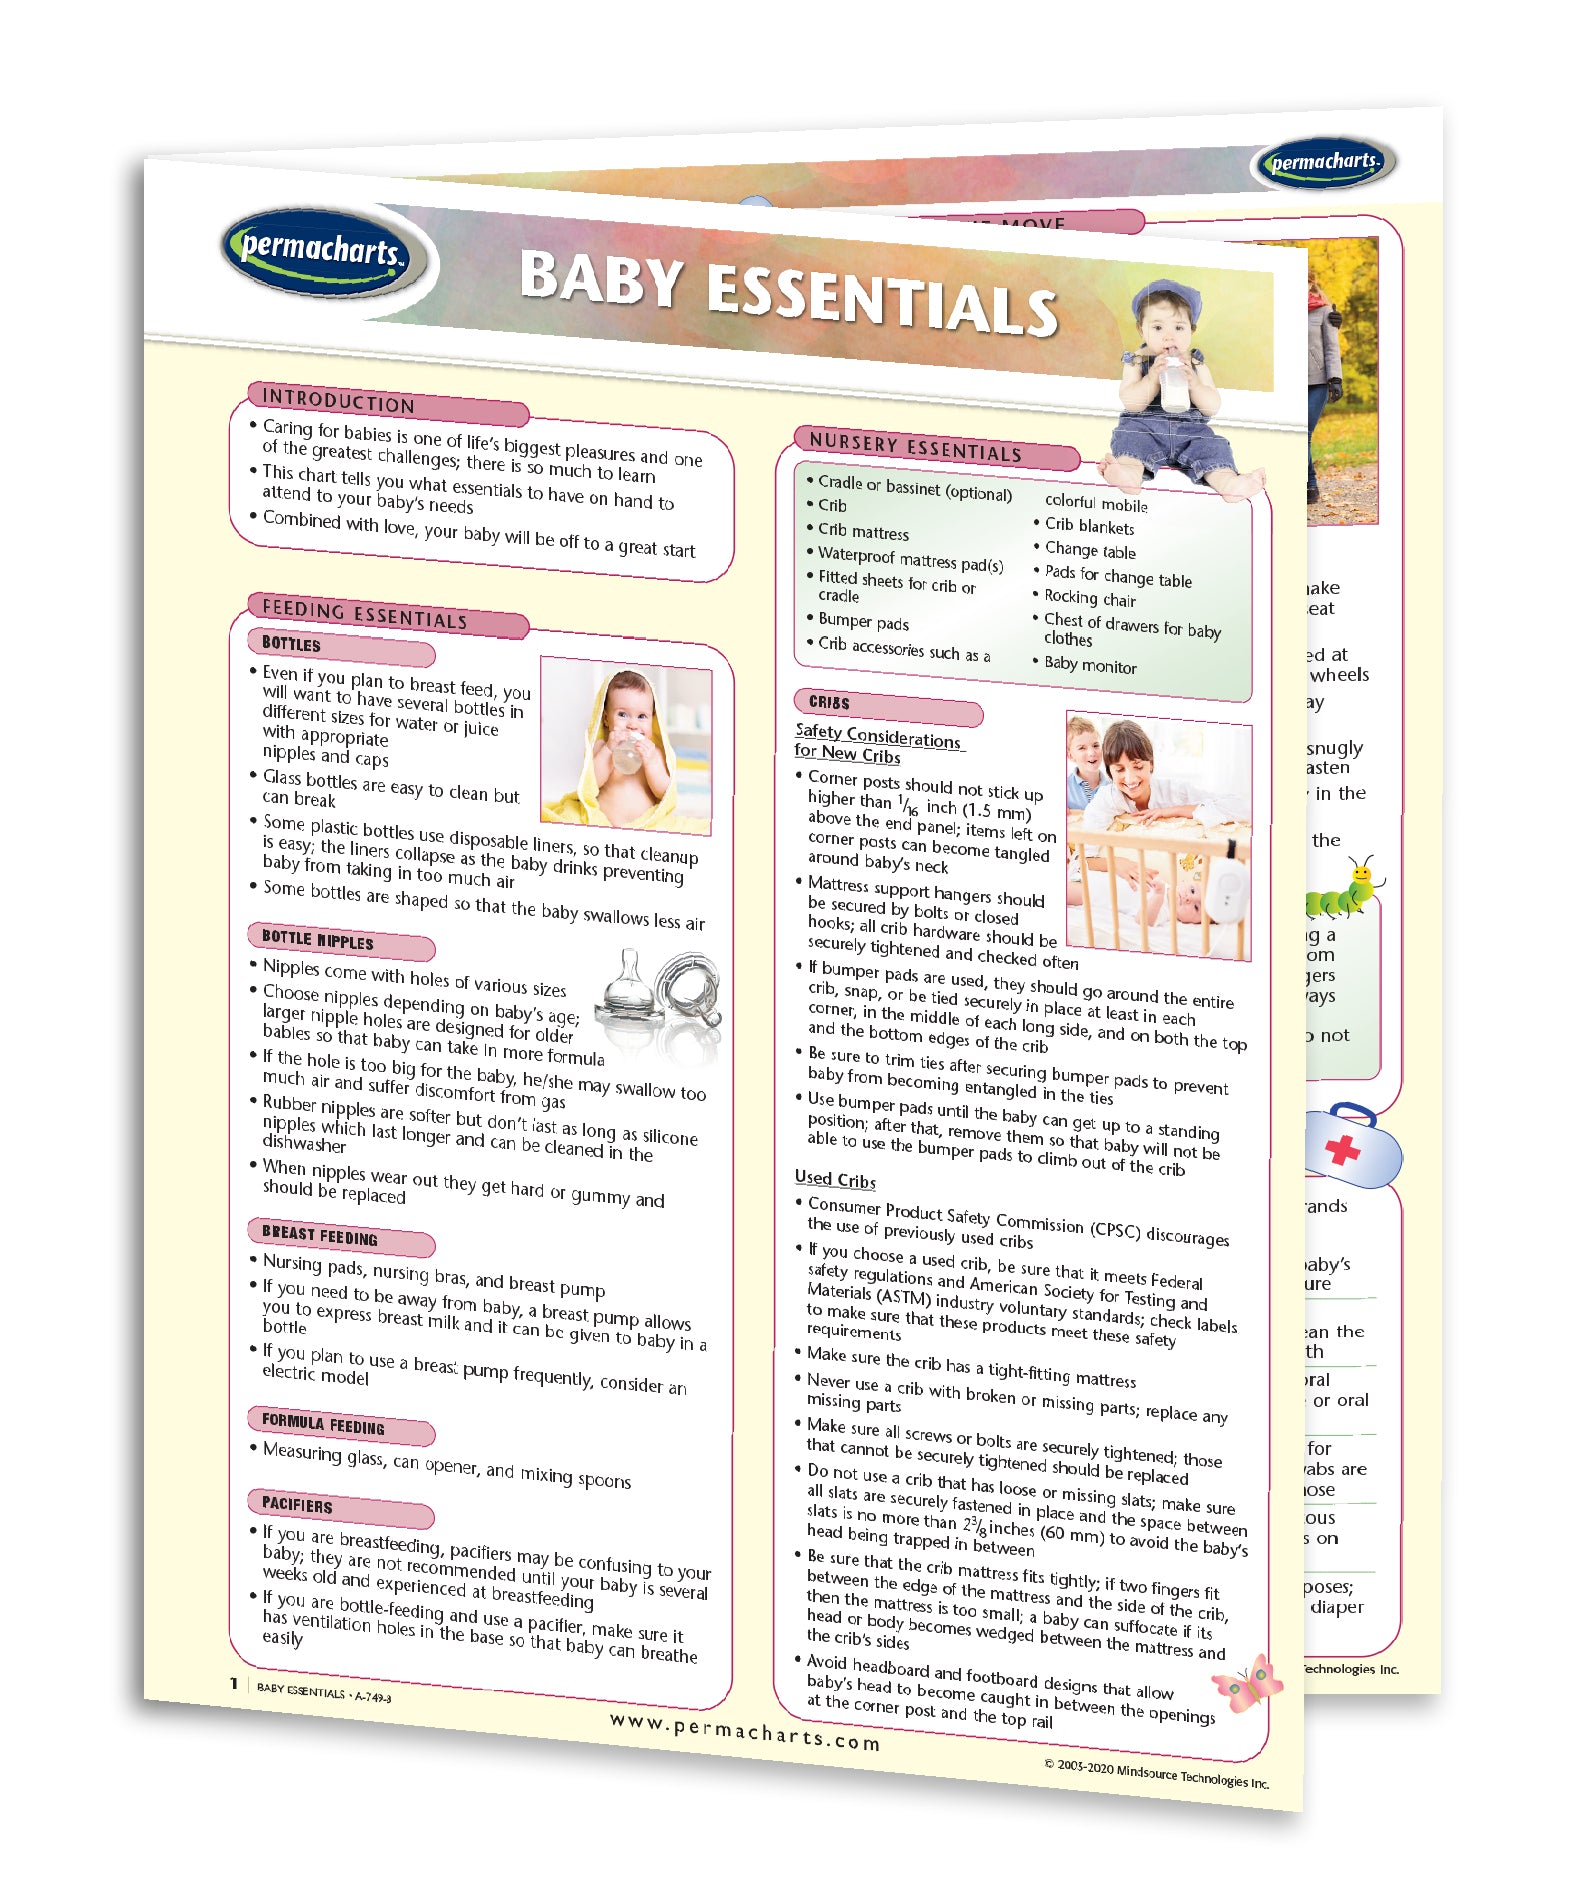 A Detailed Guide to Newborn Baby Essentials, by Bagsmitten